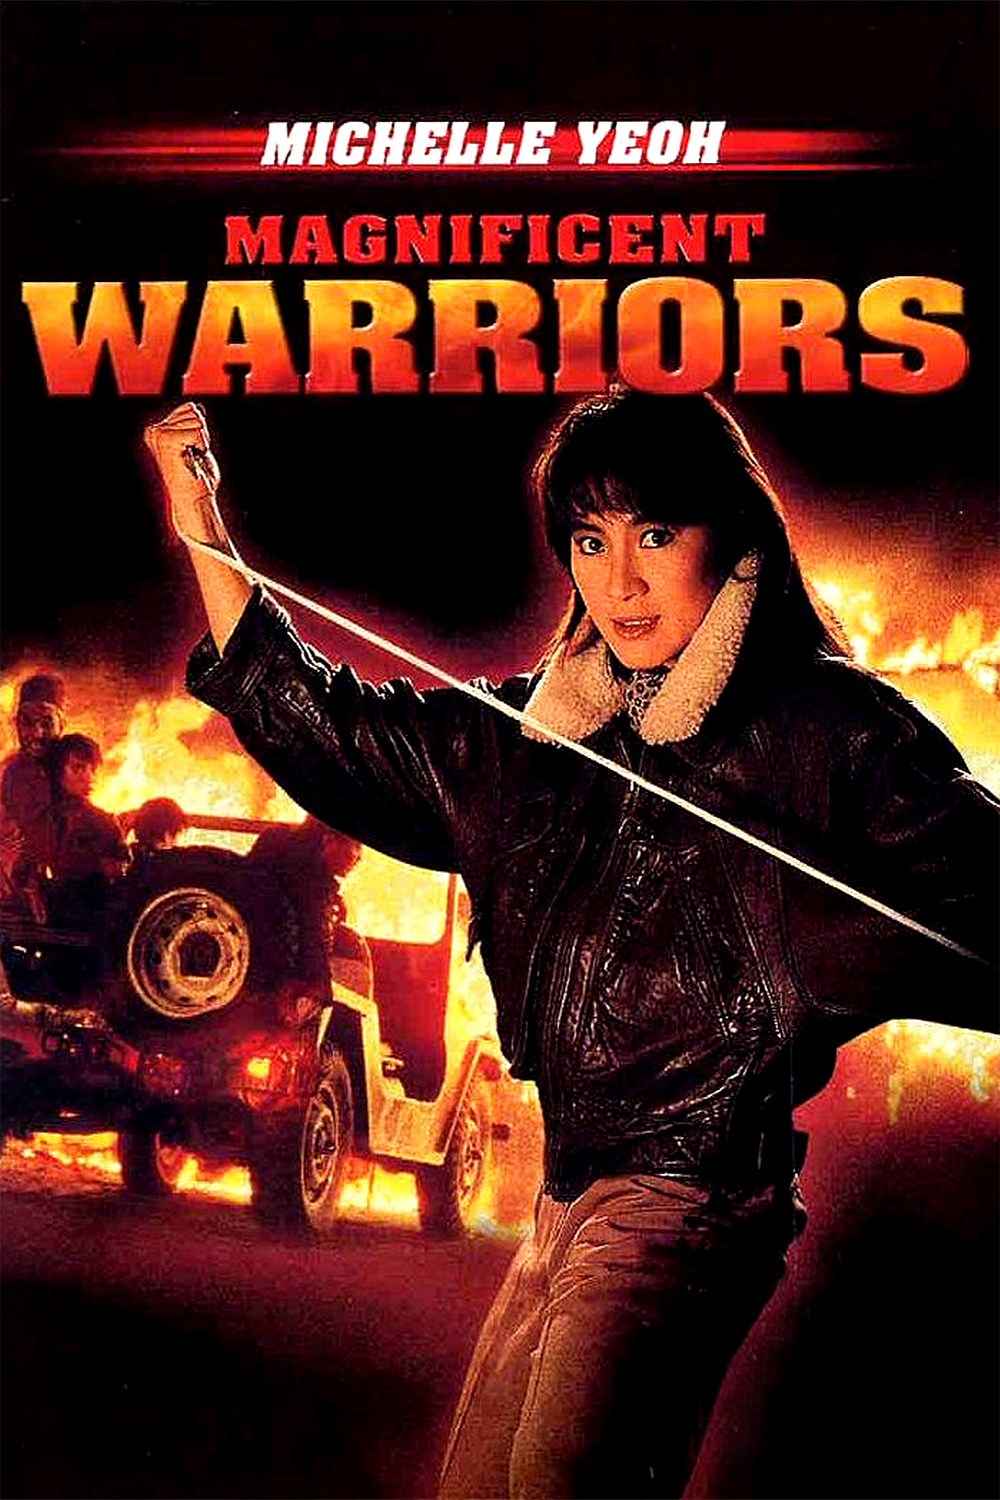 Poster for the movie "Magnificent Warriors"